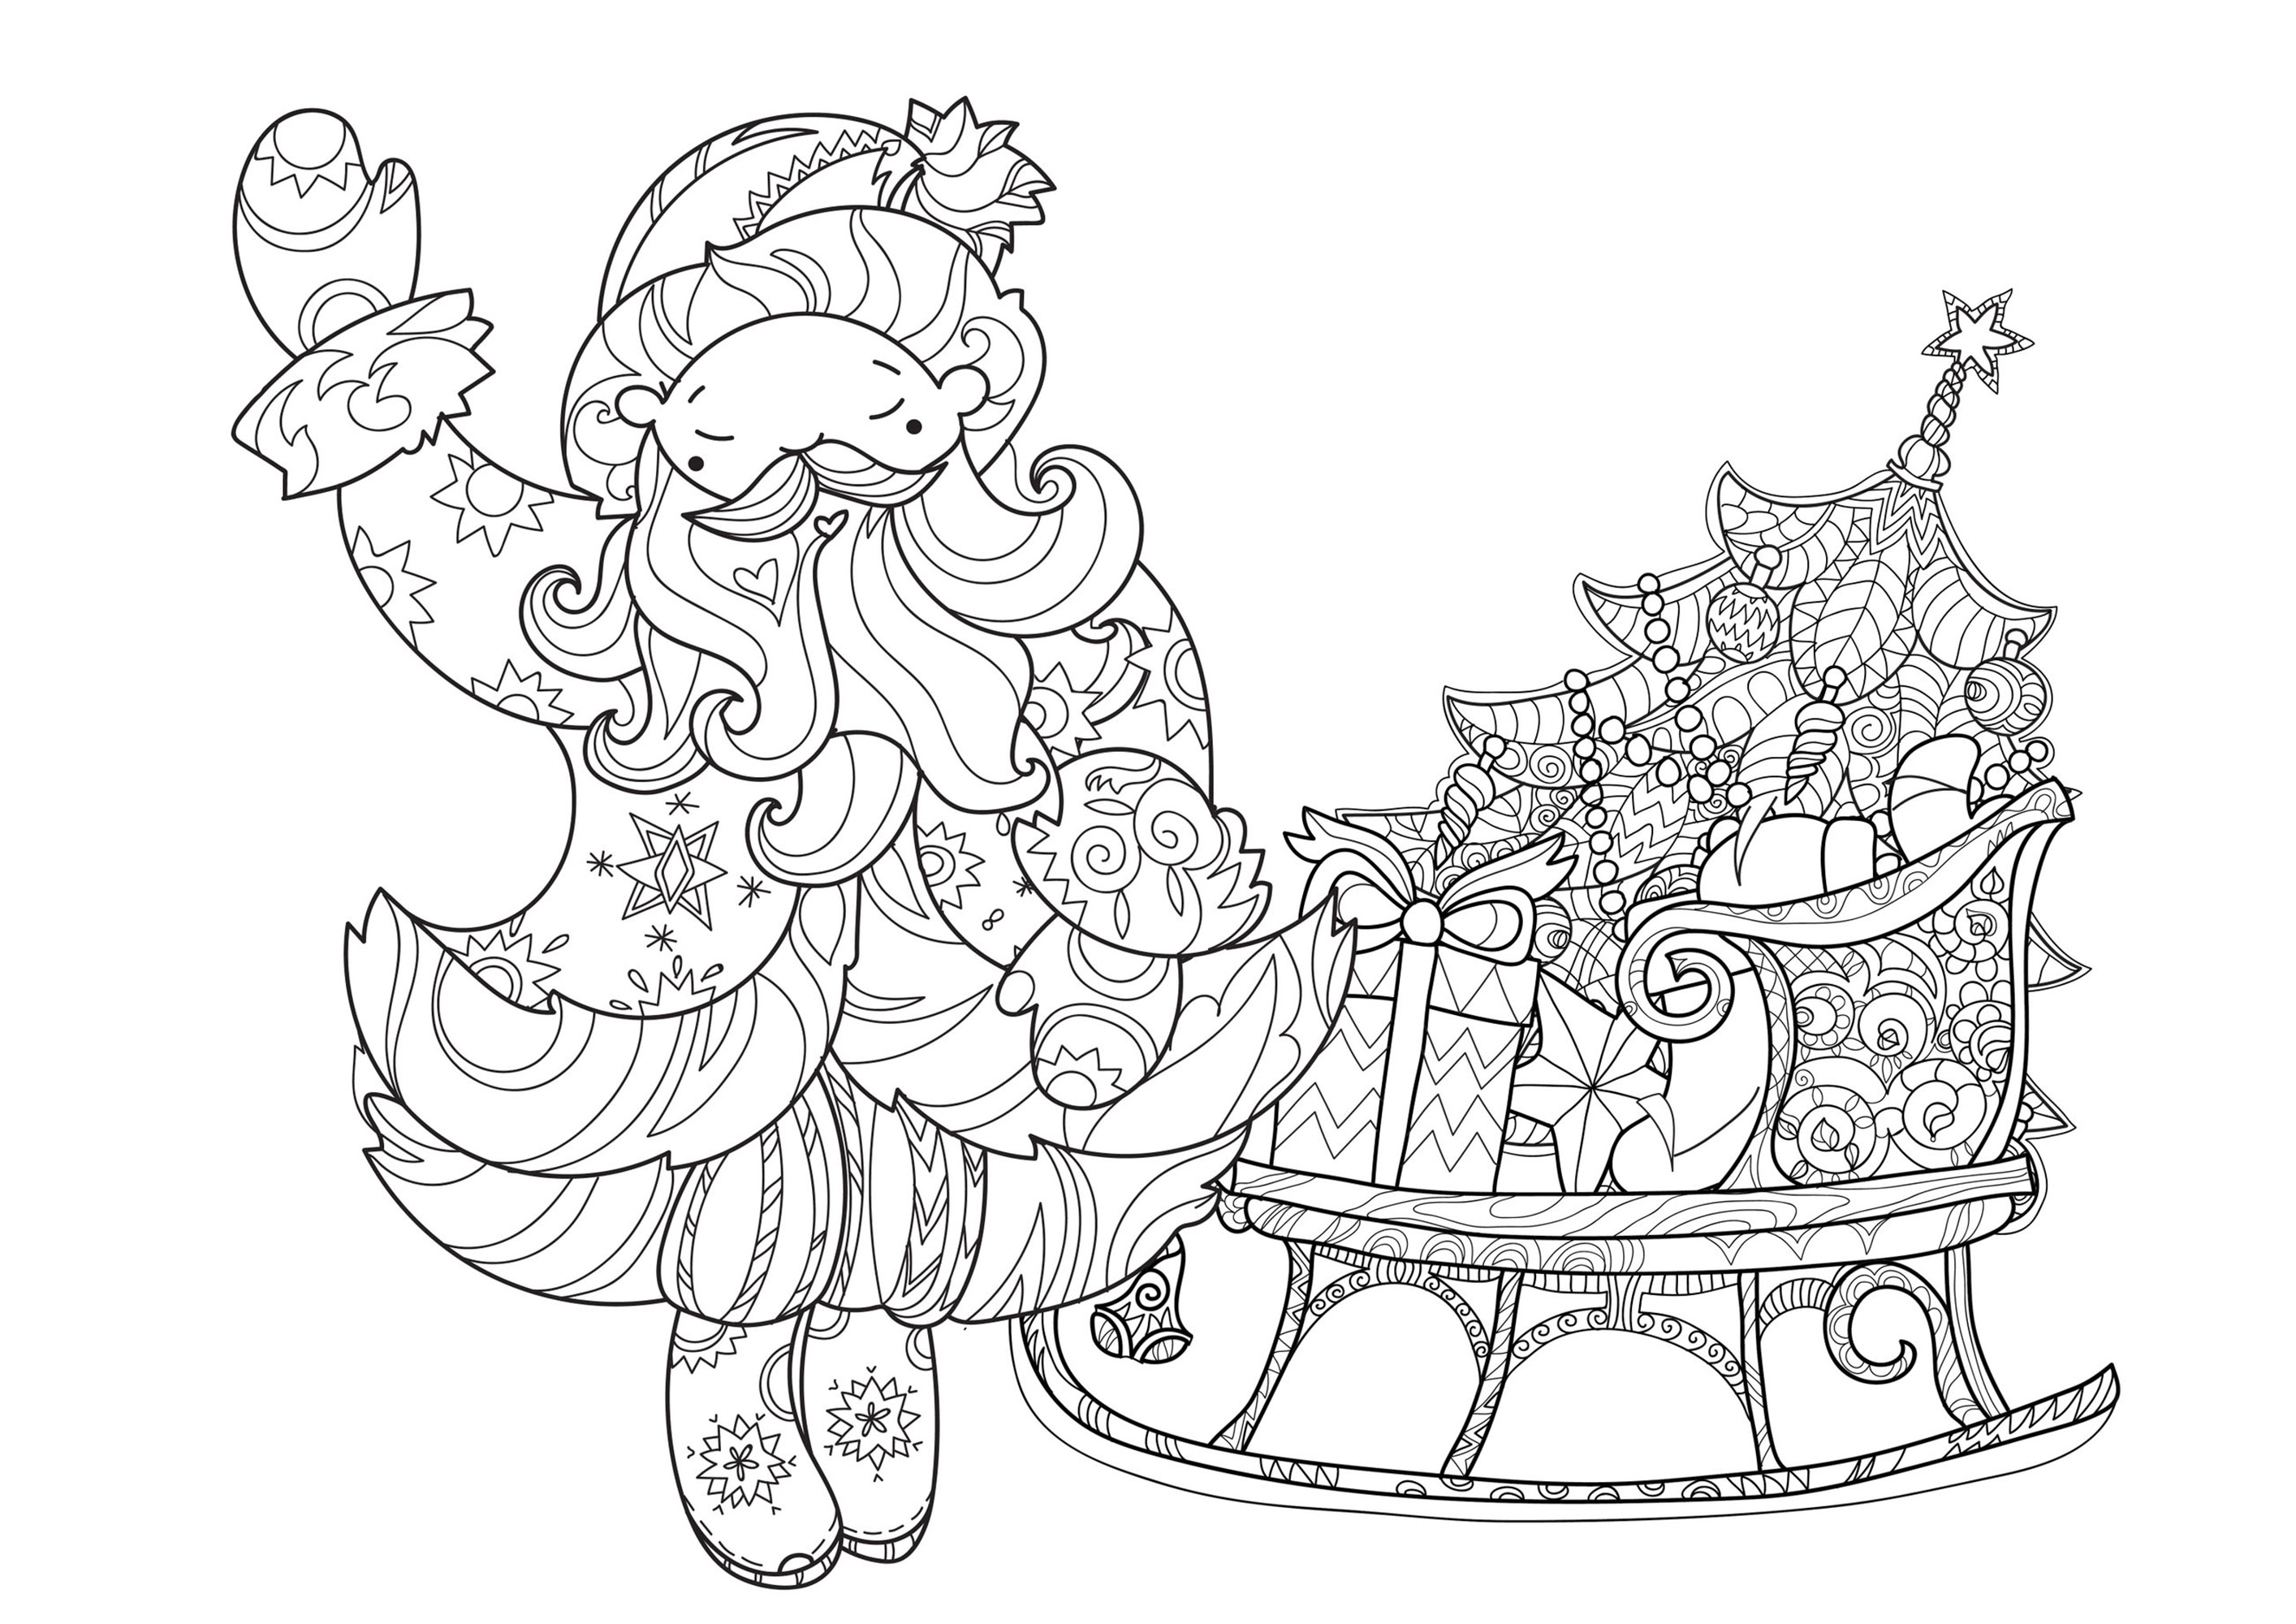 Santa Claus and his sleigh with a Christmas tree and gifts. Many diverse patterns to color, Source : 123rf   Artist : Yazzik